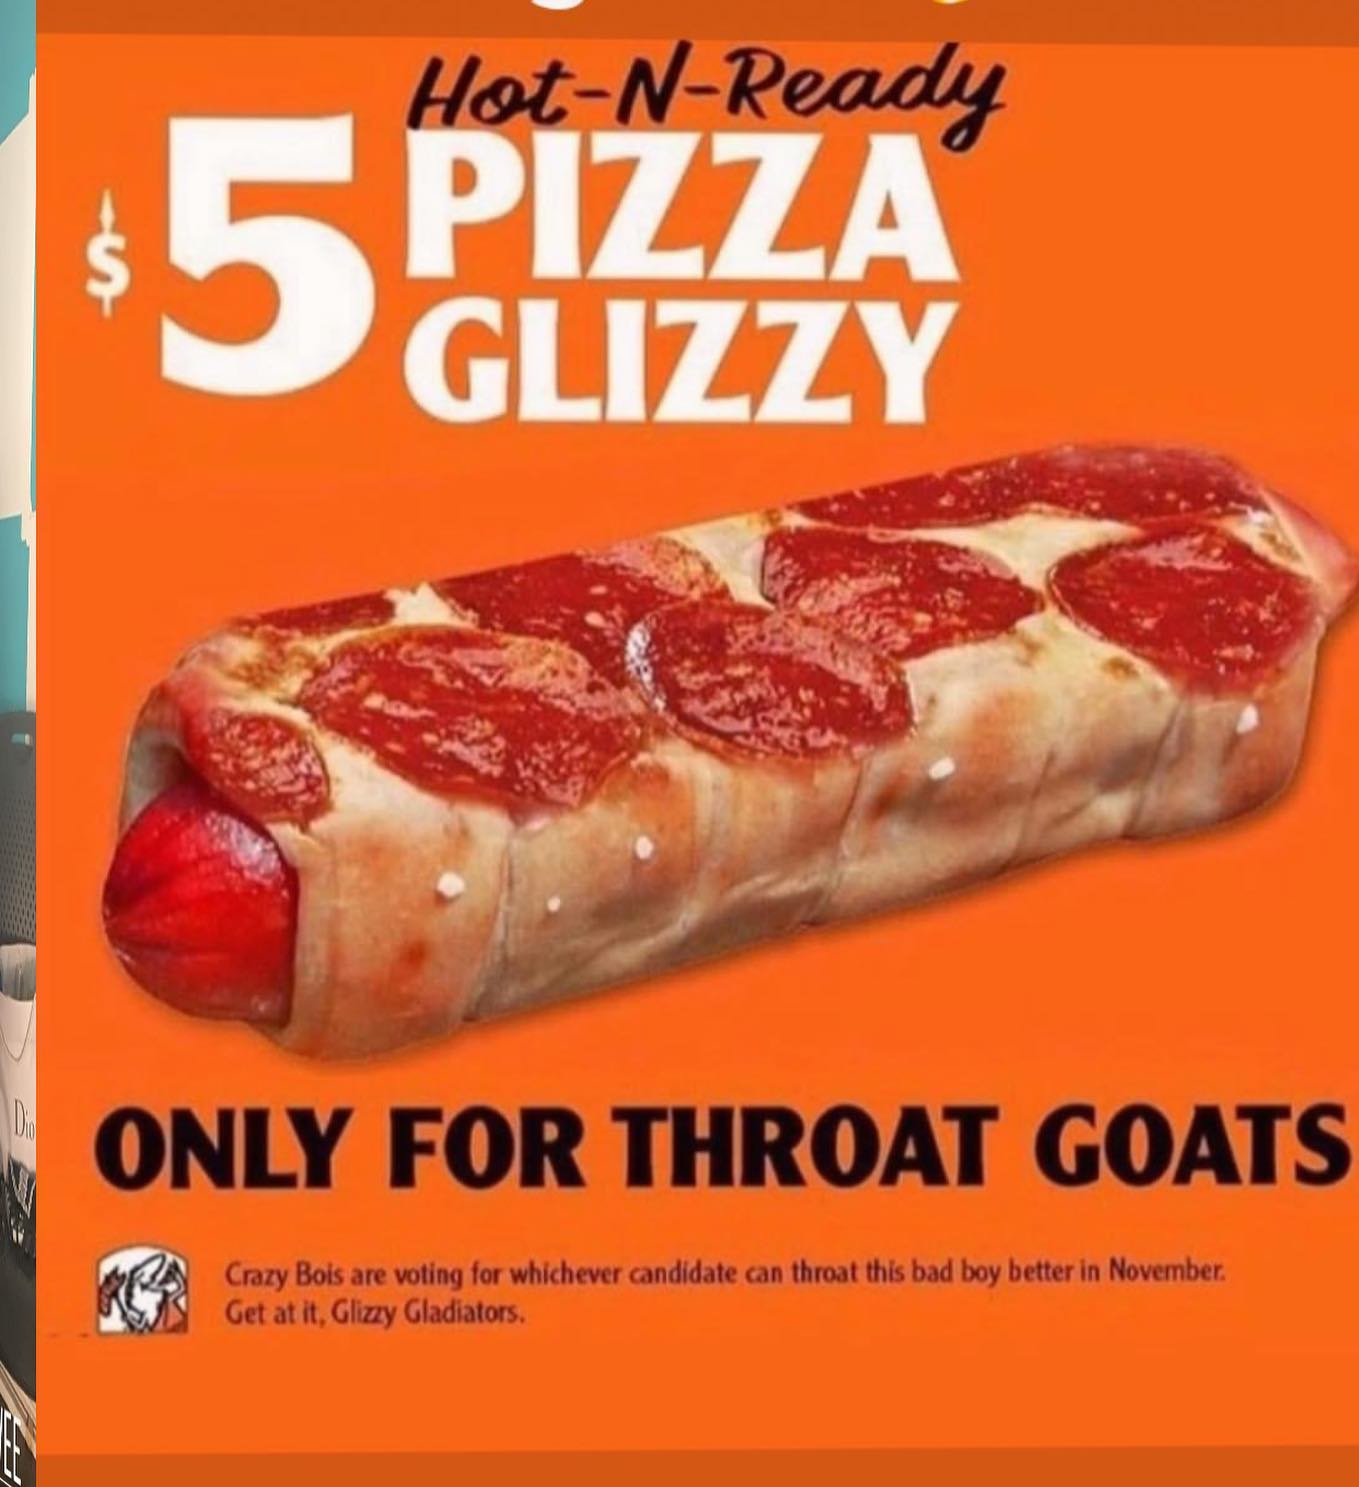 glizzy - pepperoni - 5 HotNReady Pizza Glizzy Only For Throat Goats Crazy Bois are voting for whichever candidate can throat this bad boy better in November Get at it, Glizzy Gladiators.